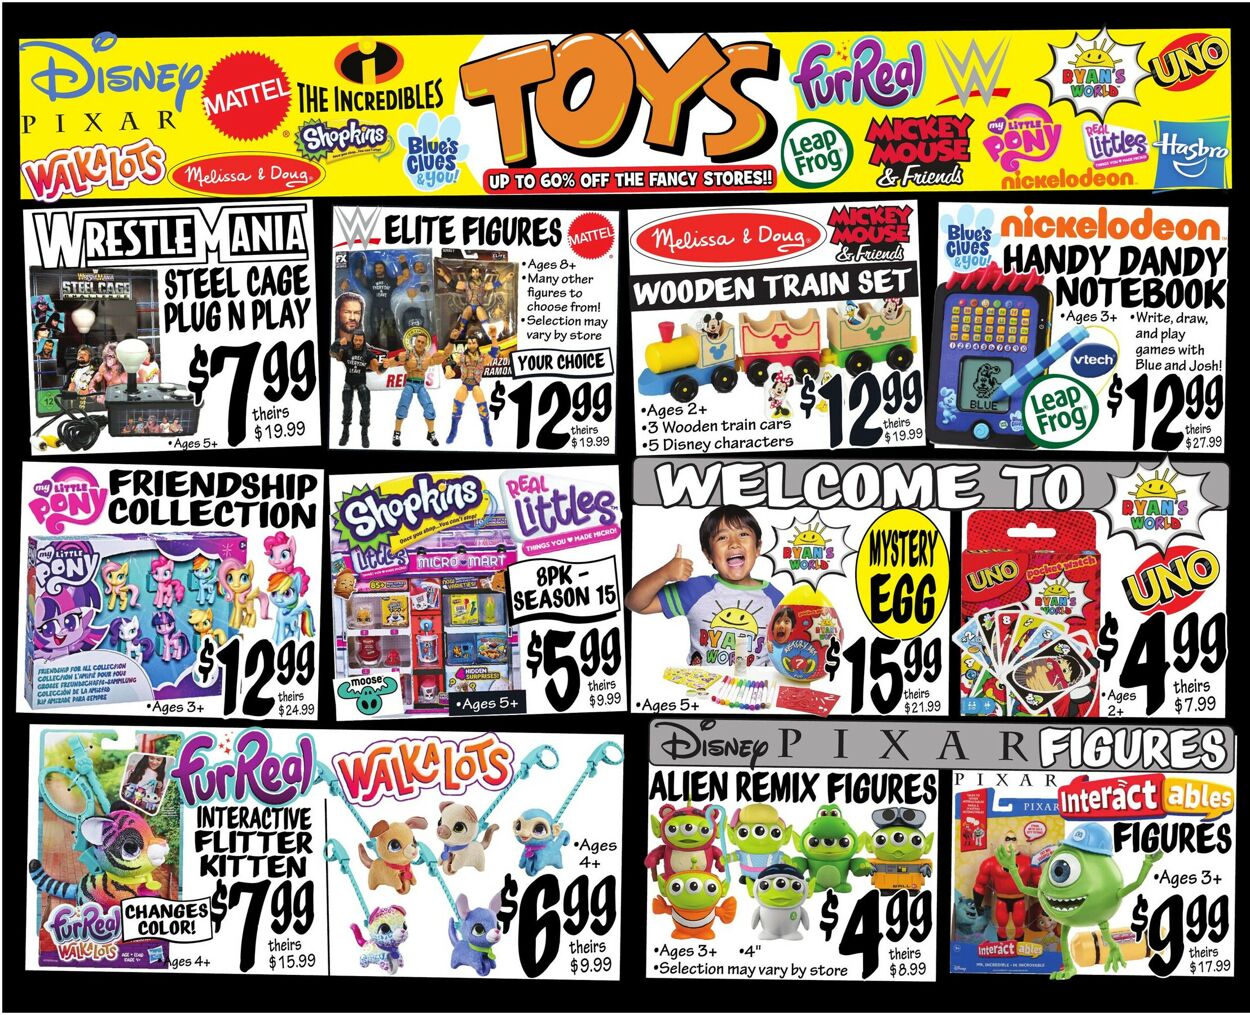 Catalogue Ollie's from 10/06/2022